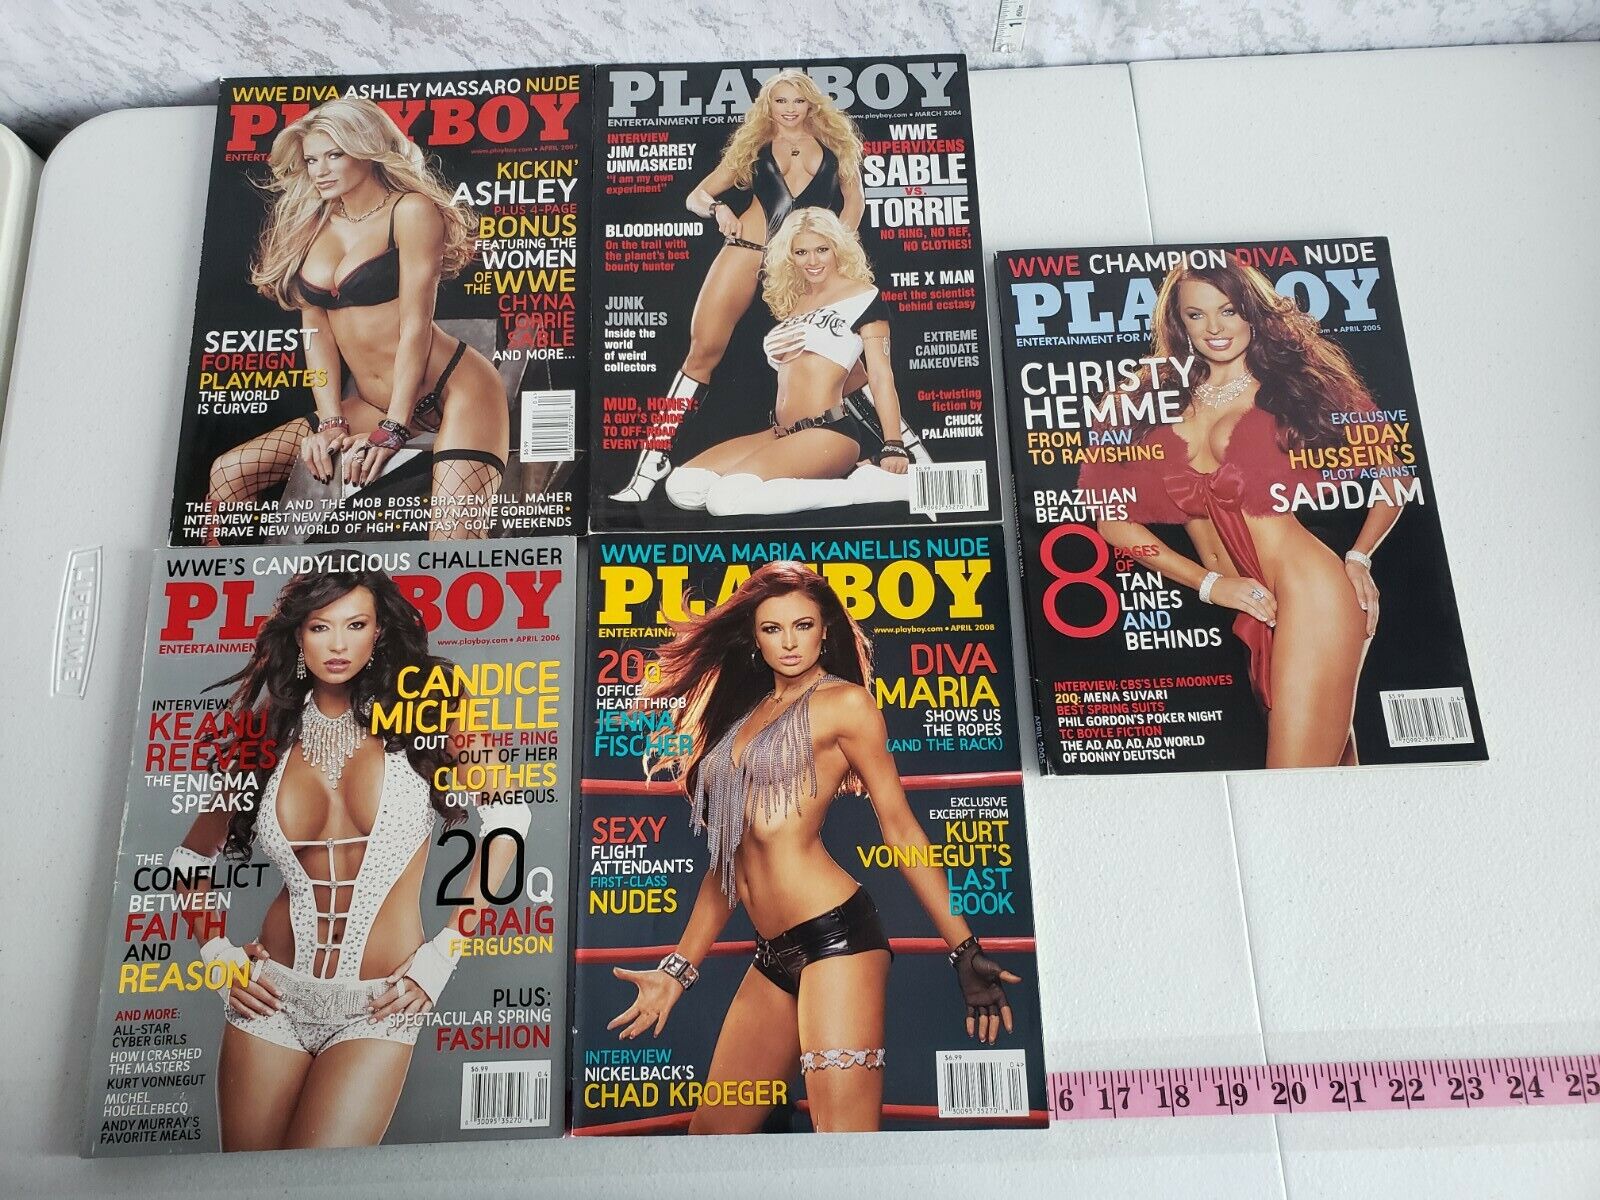 andrew plumer recommends wwe divas who did playboy pic